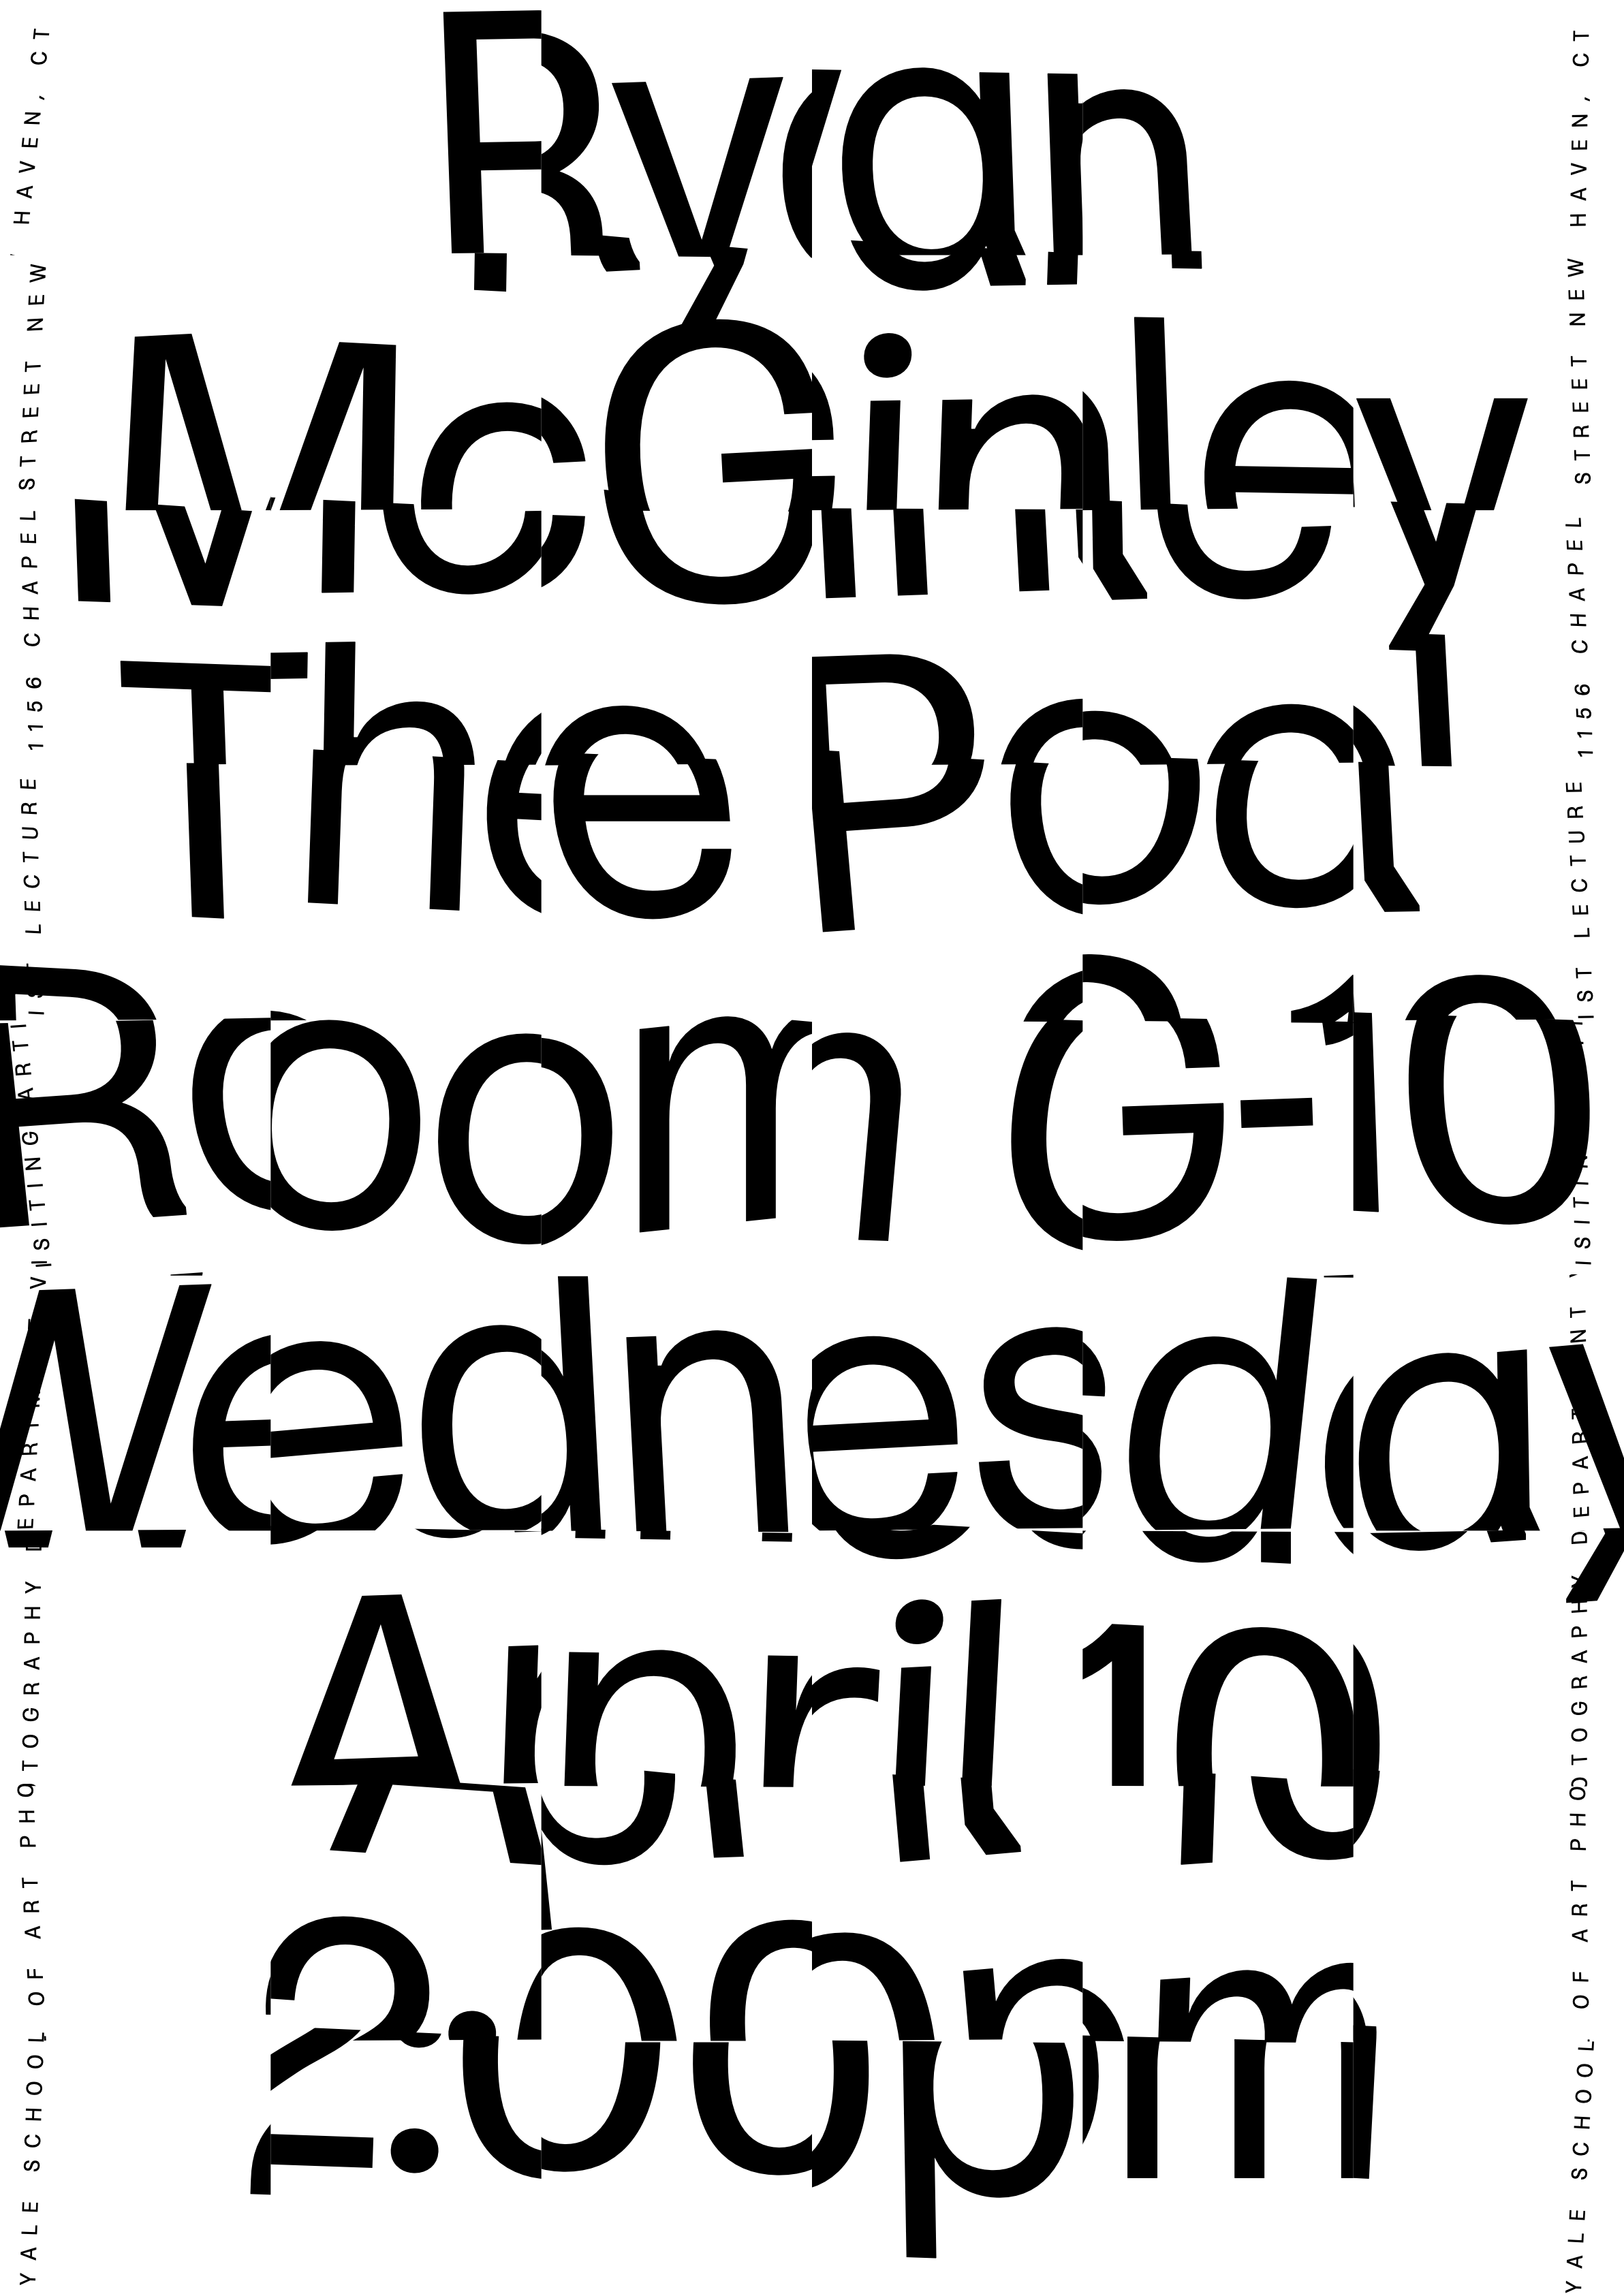 McGinley Poster sample